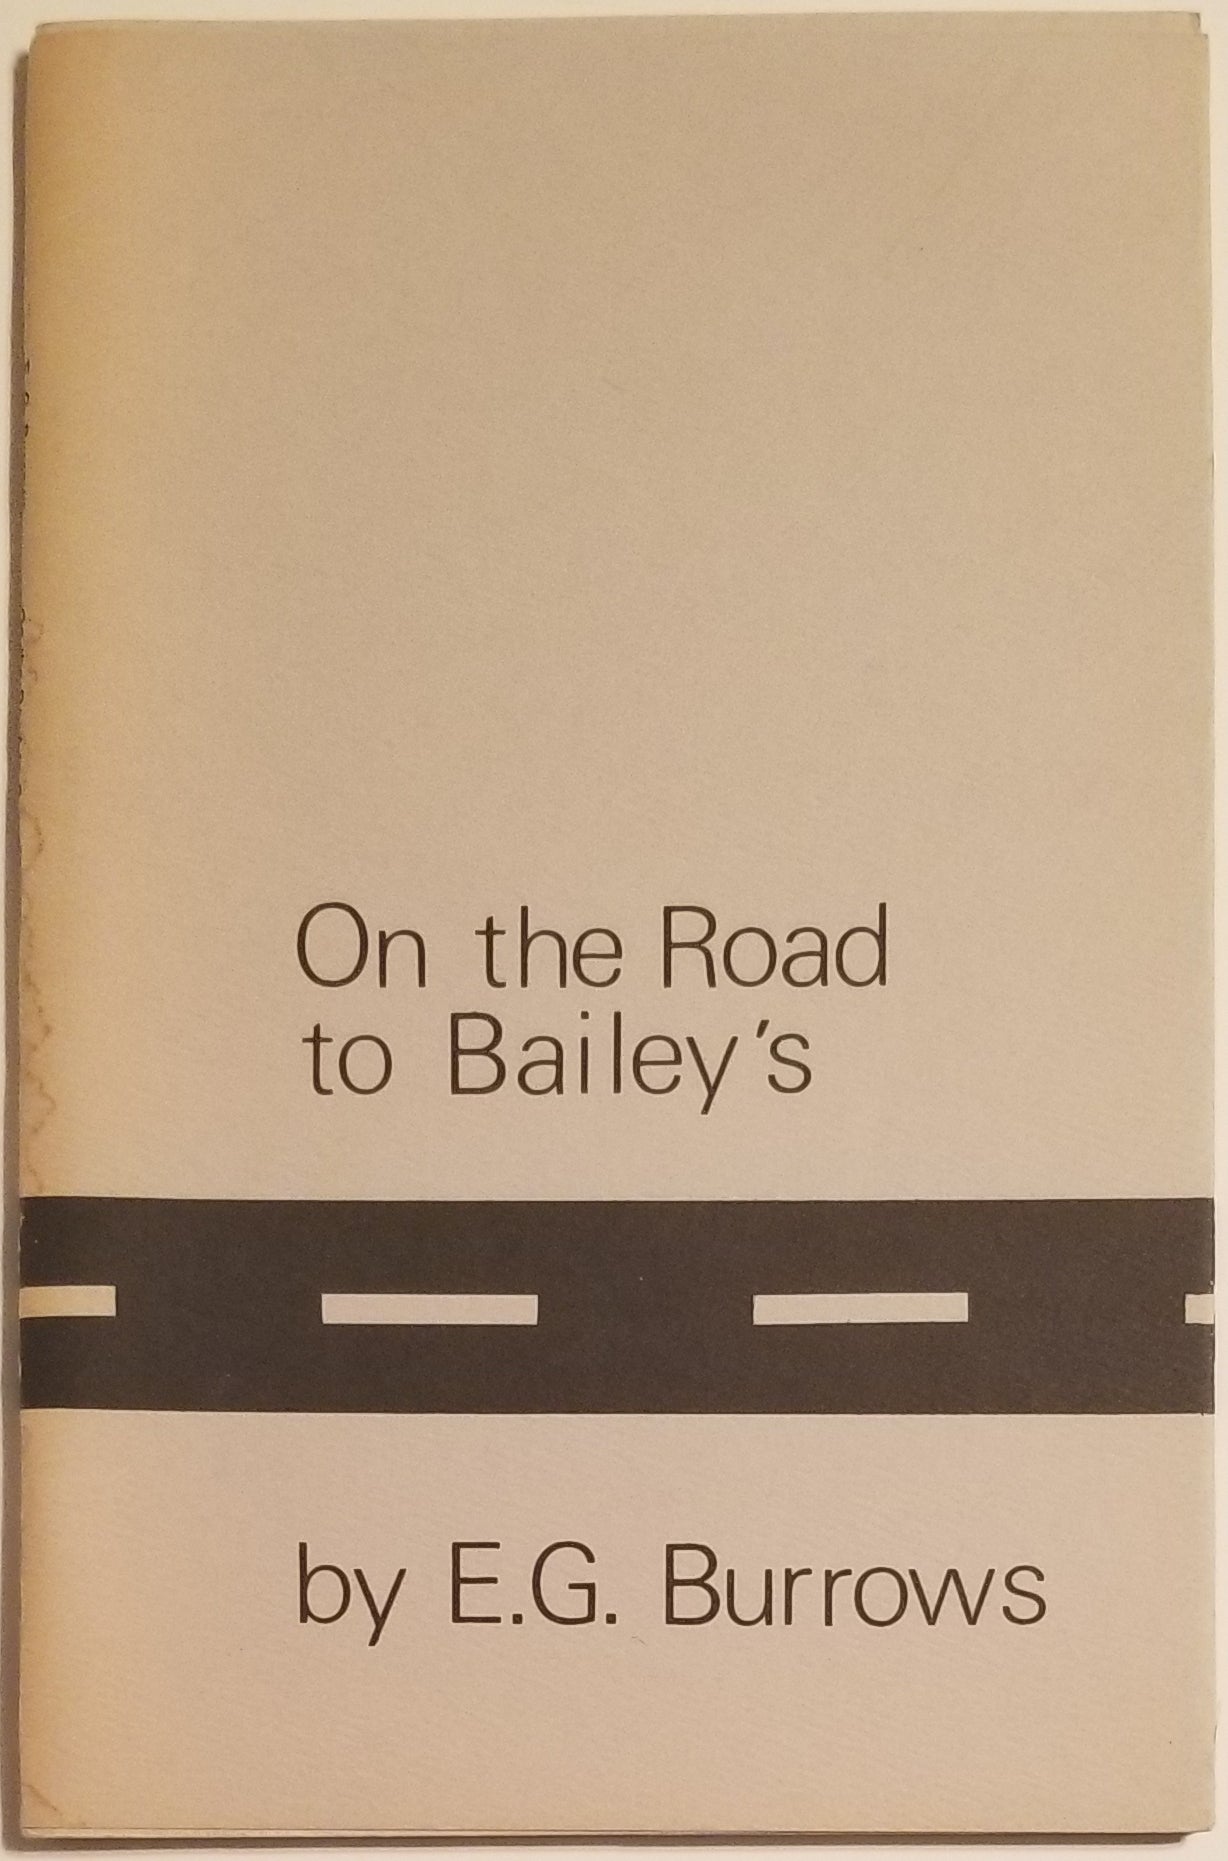 [Book #13574] ON THE ROAD TO BAILEY'S. E. G. Burrows.